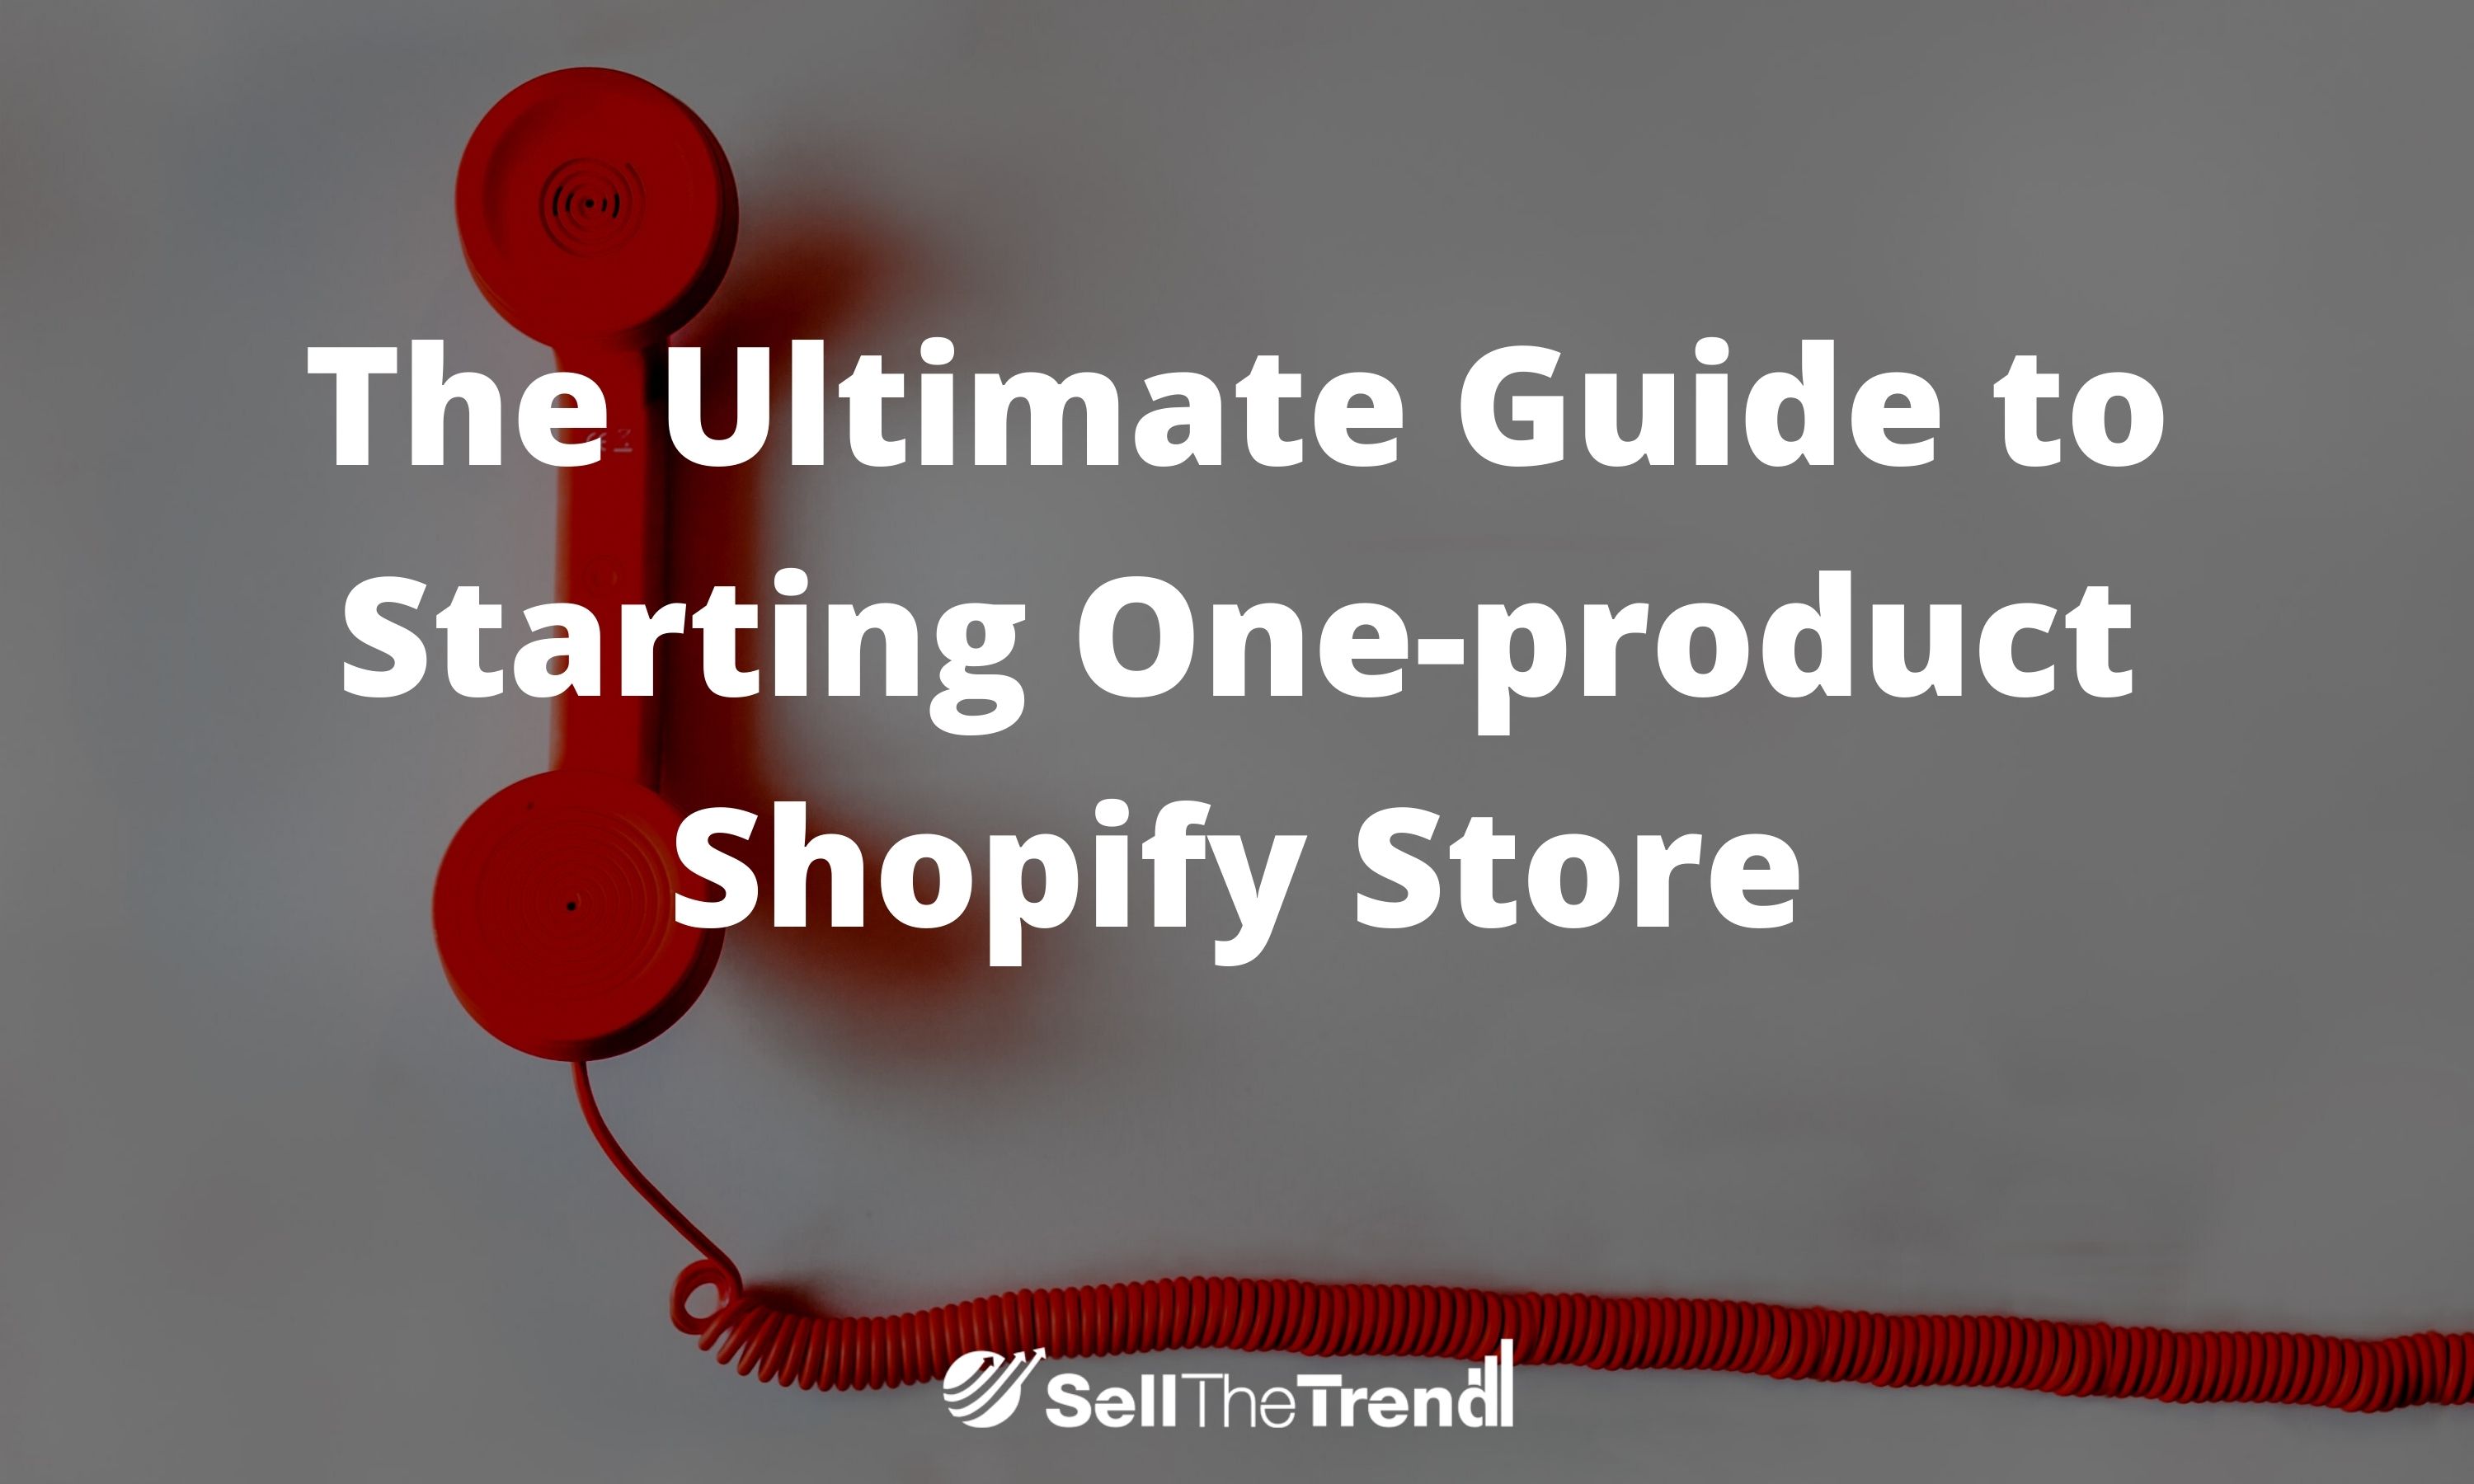 The Ultimate Guide to Start One-product Shopify Store